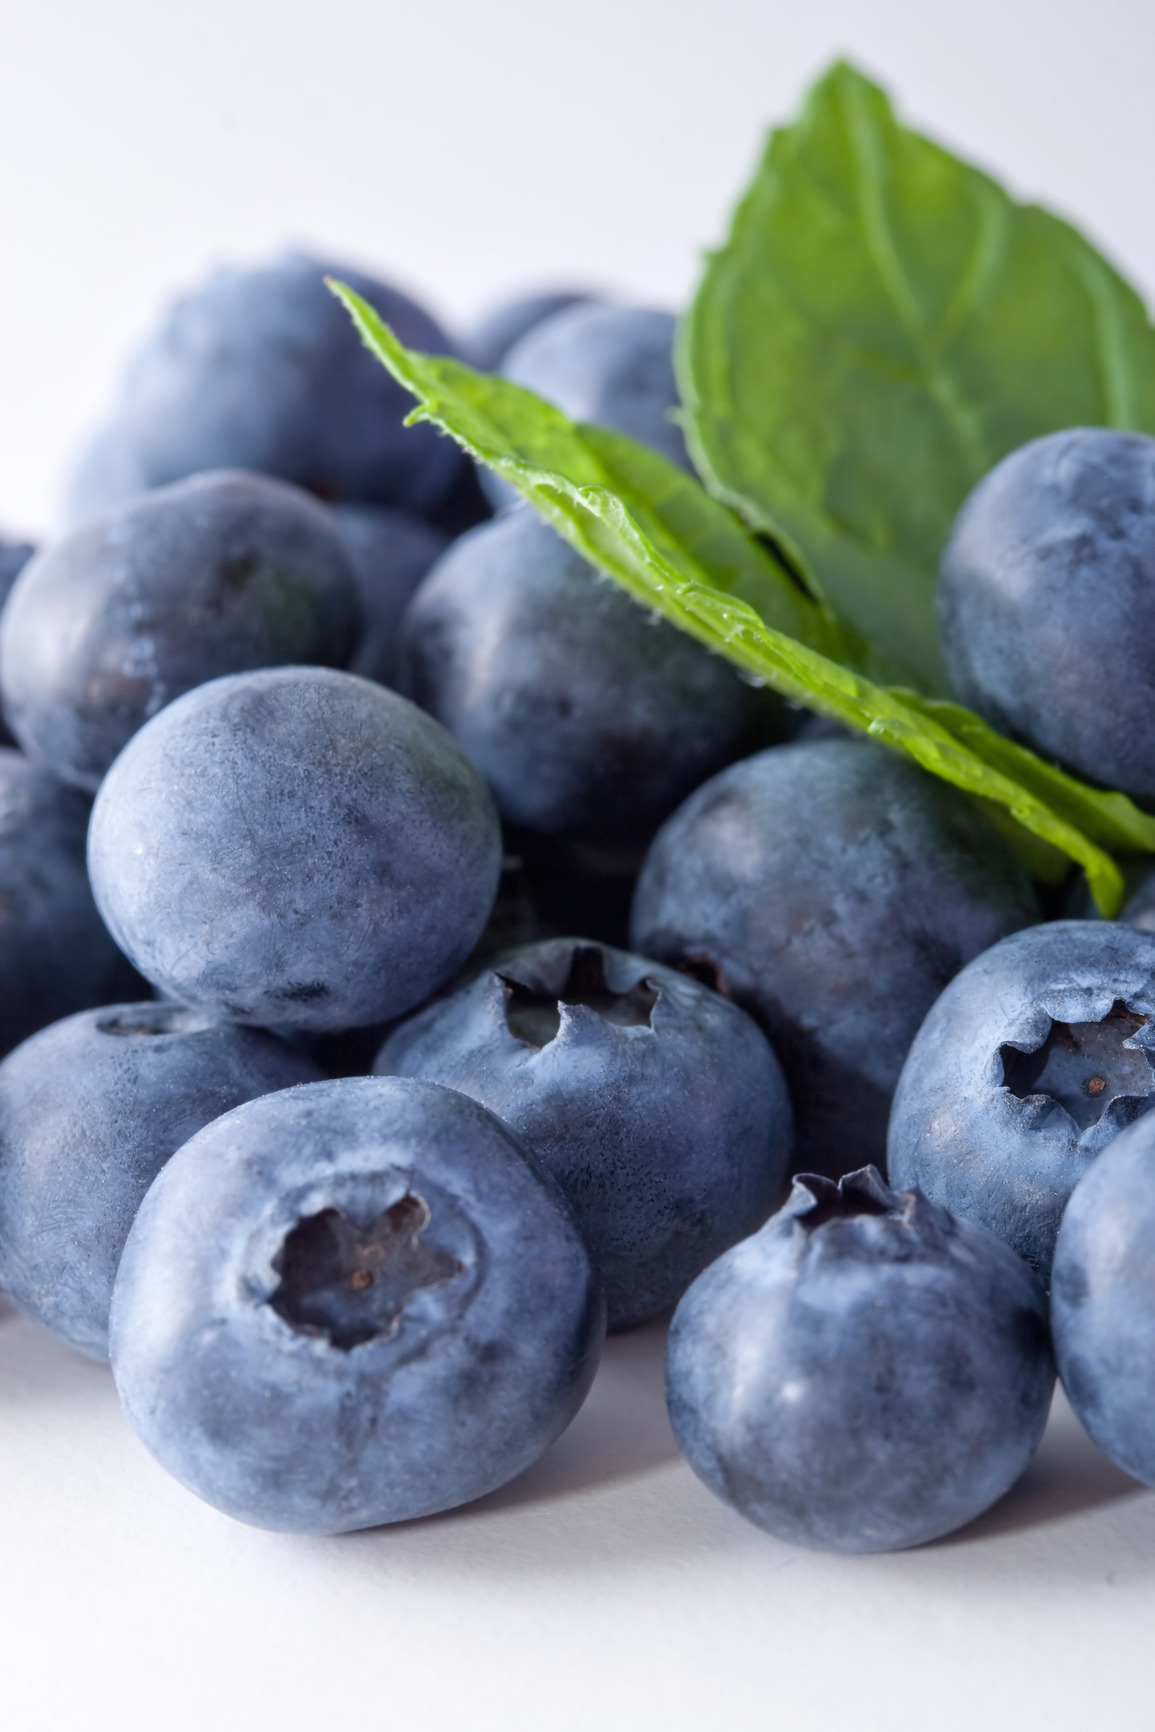 great-reasons-to-eat-blueberries http://ift.tt/1auvWpW